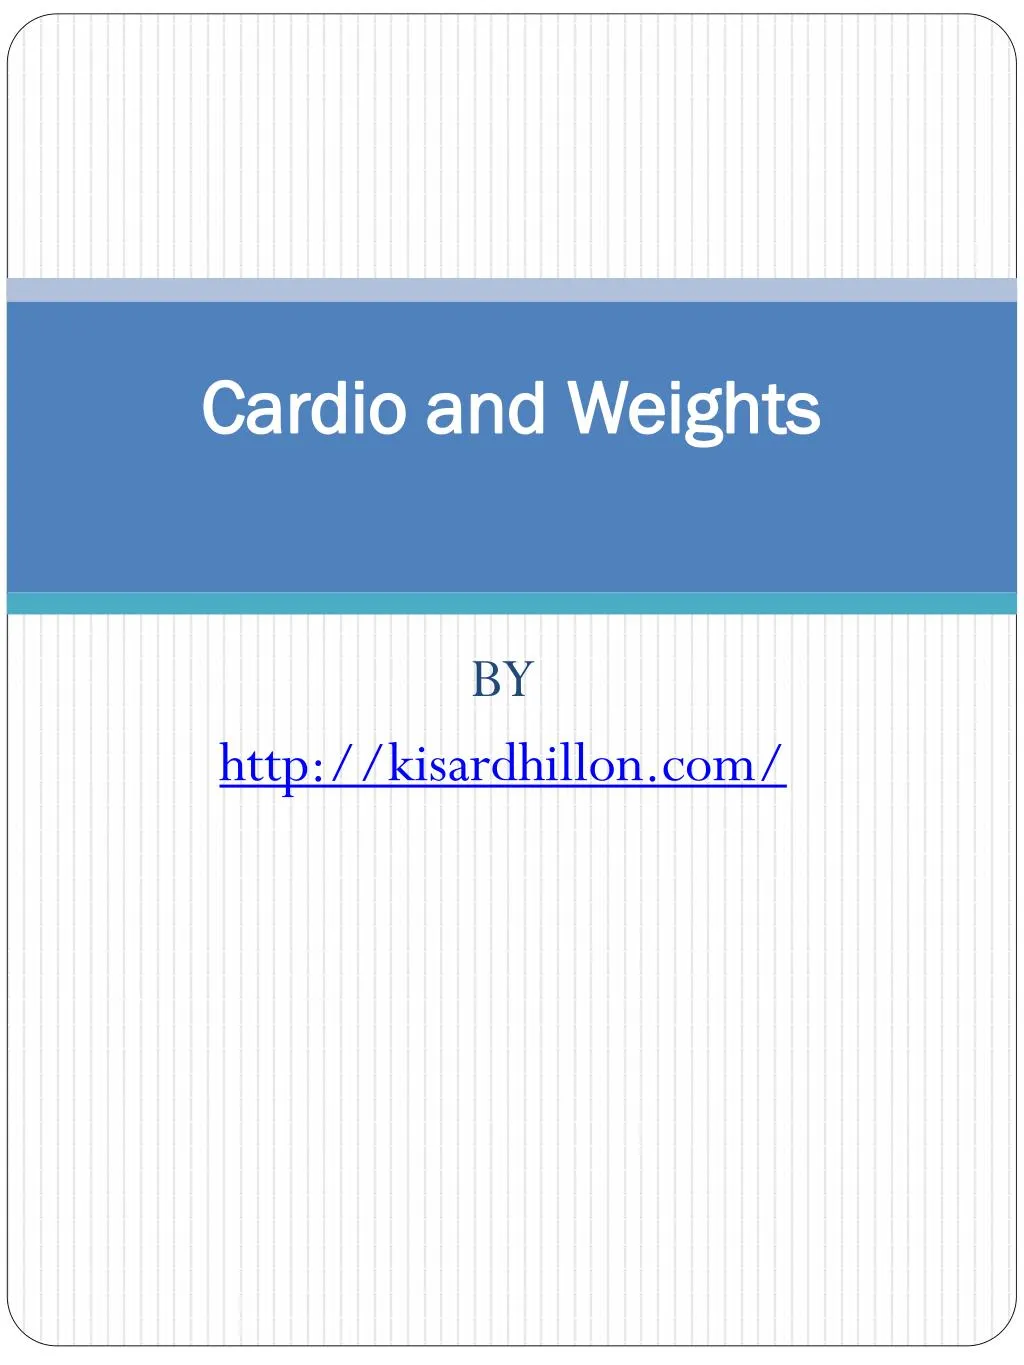 cardio and weights